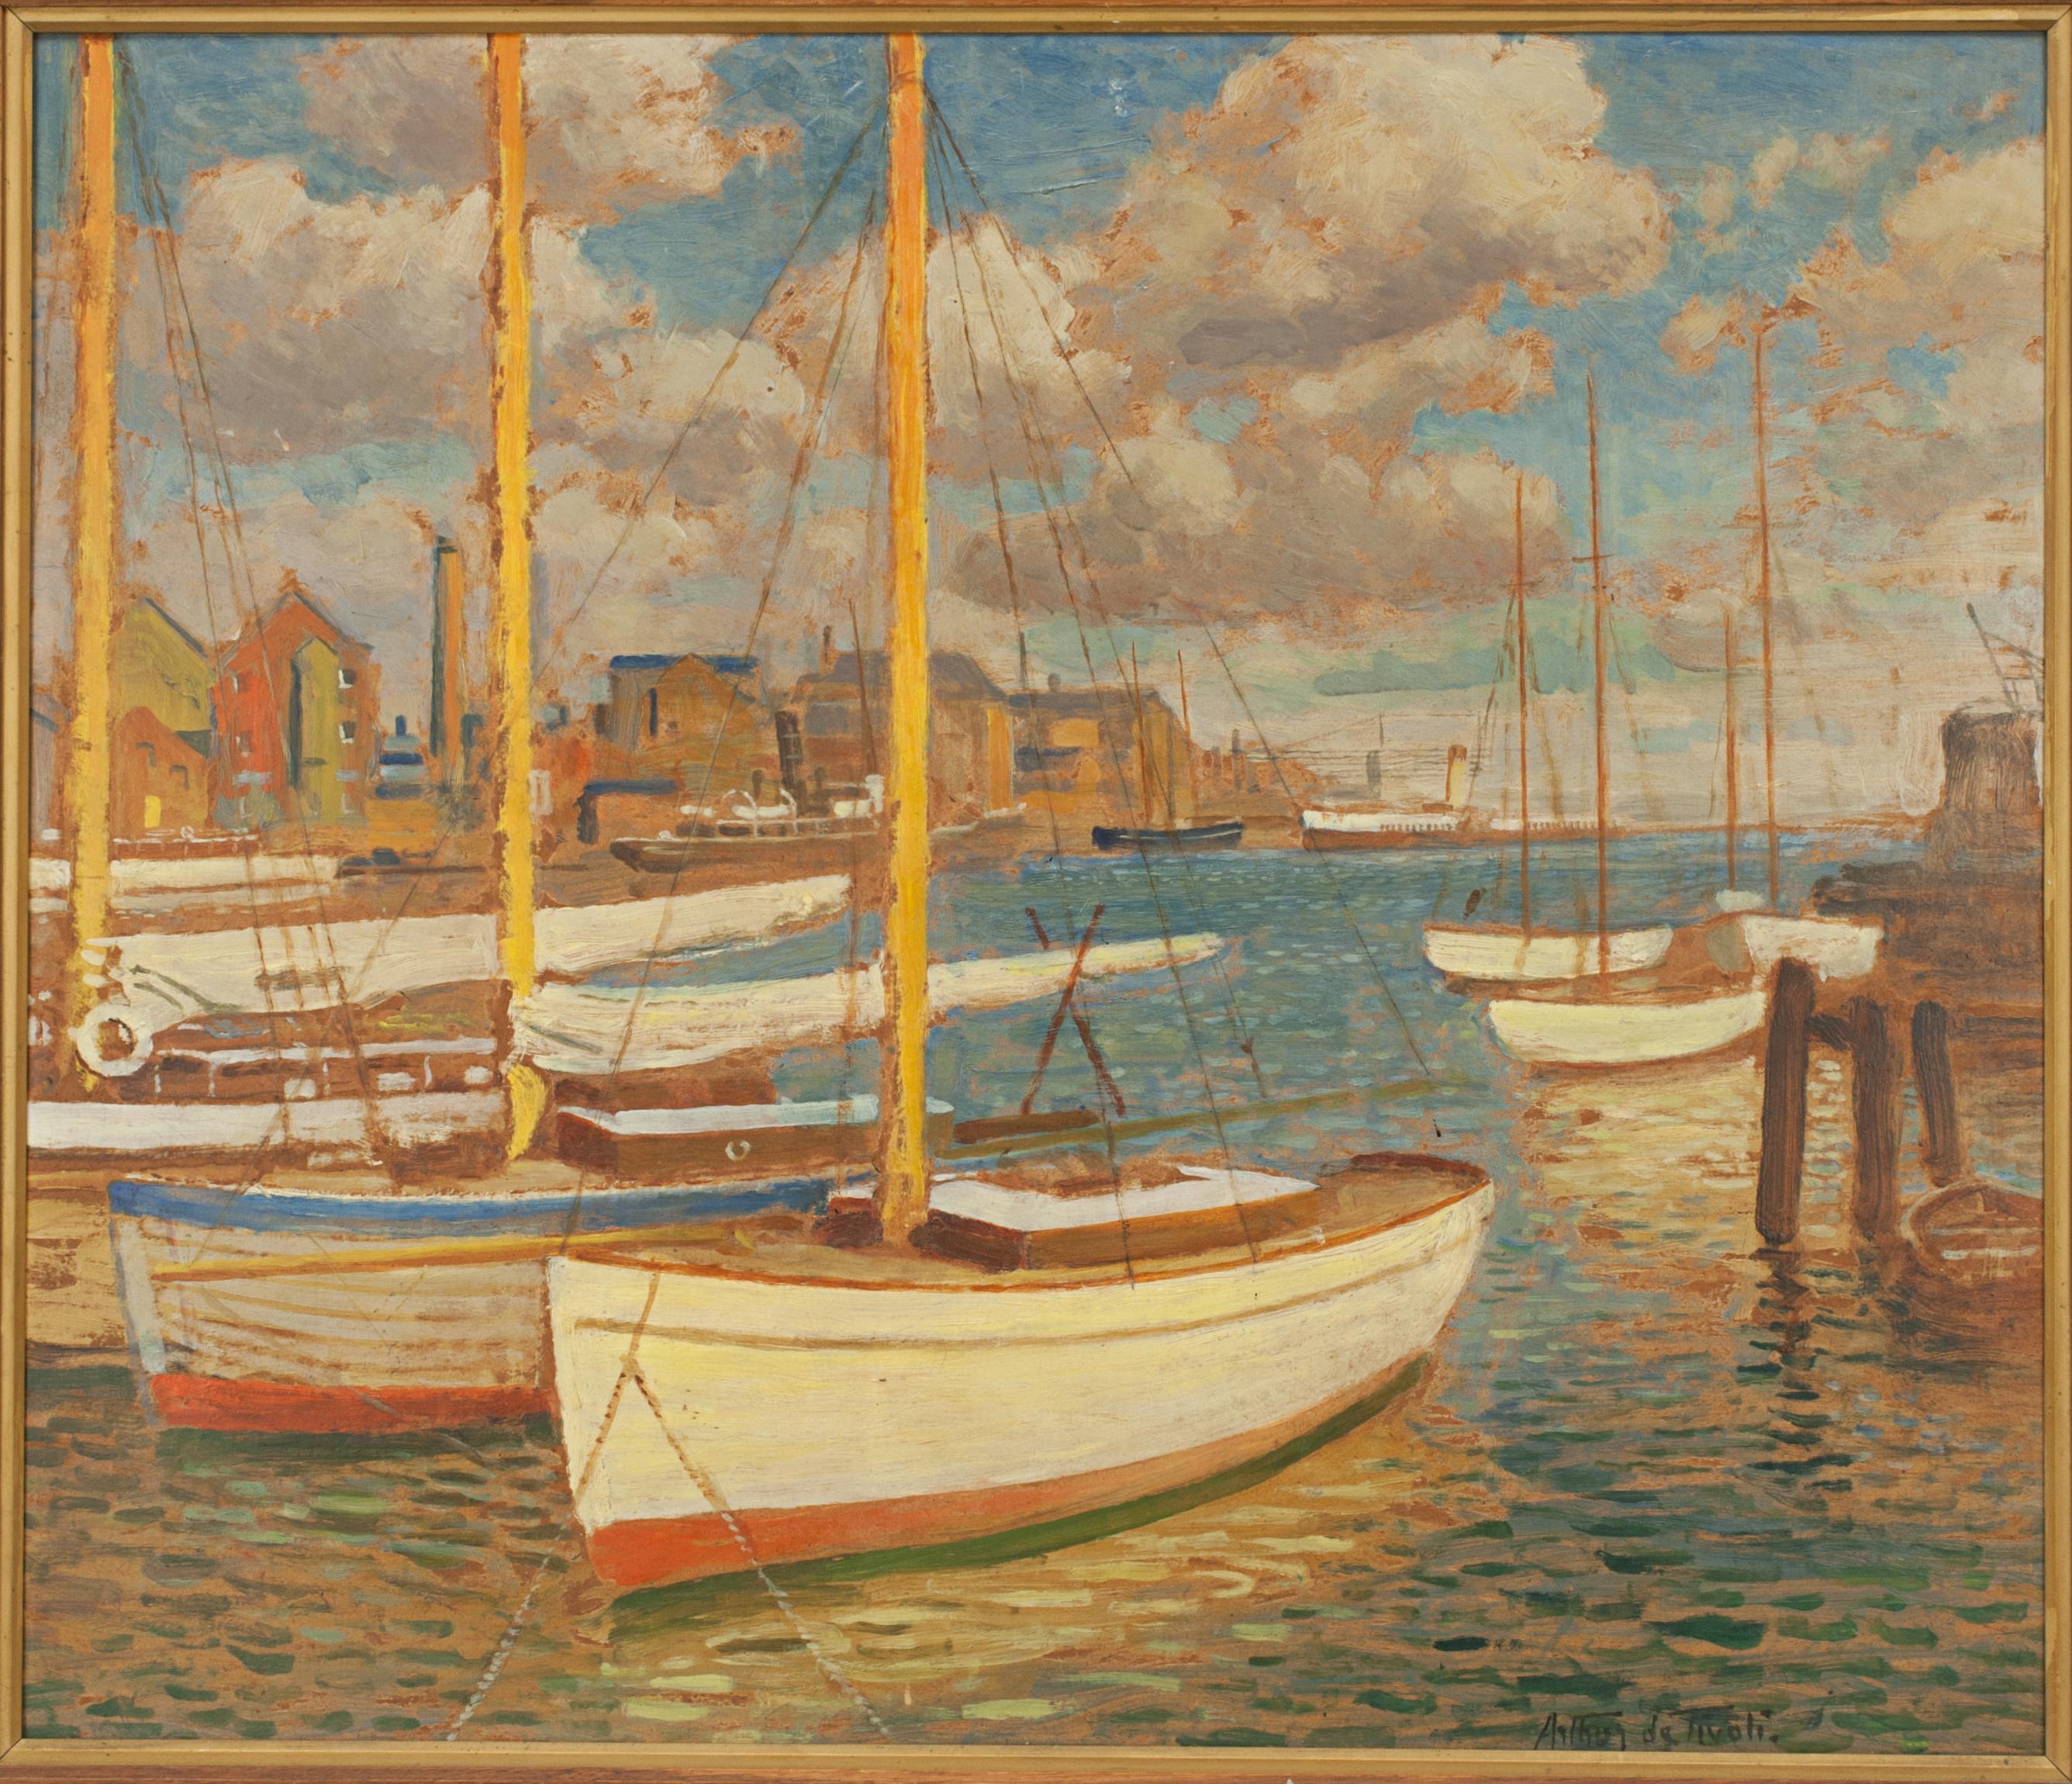 Oil on board by Arthur De Tivoli, Poole Harbour.
A very good oil on board by the Italian artist Arthur (arturo) de Tivoli (1891 - 1961) of Poole harbour, signed lower right by the artist. There is a hand written label on the rear that reads 'Arthur